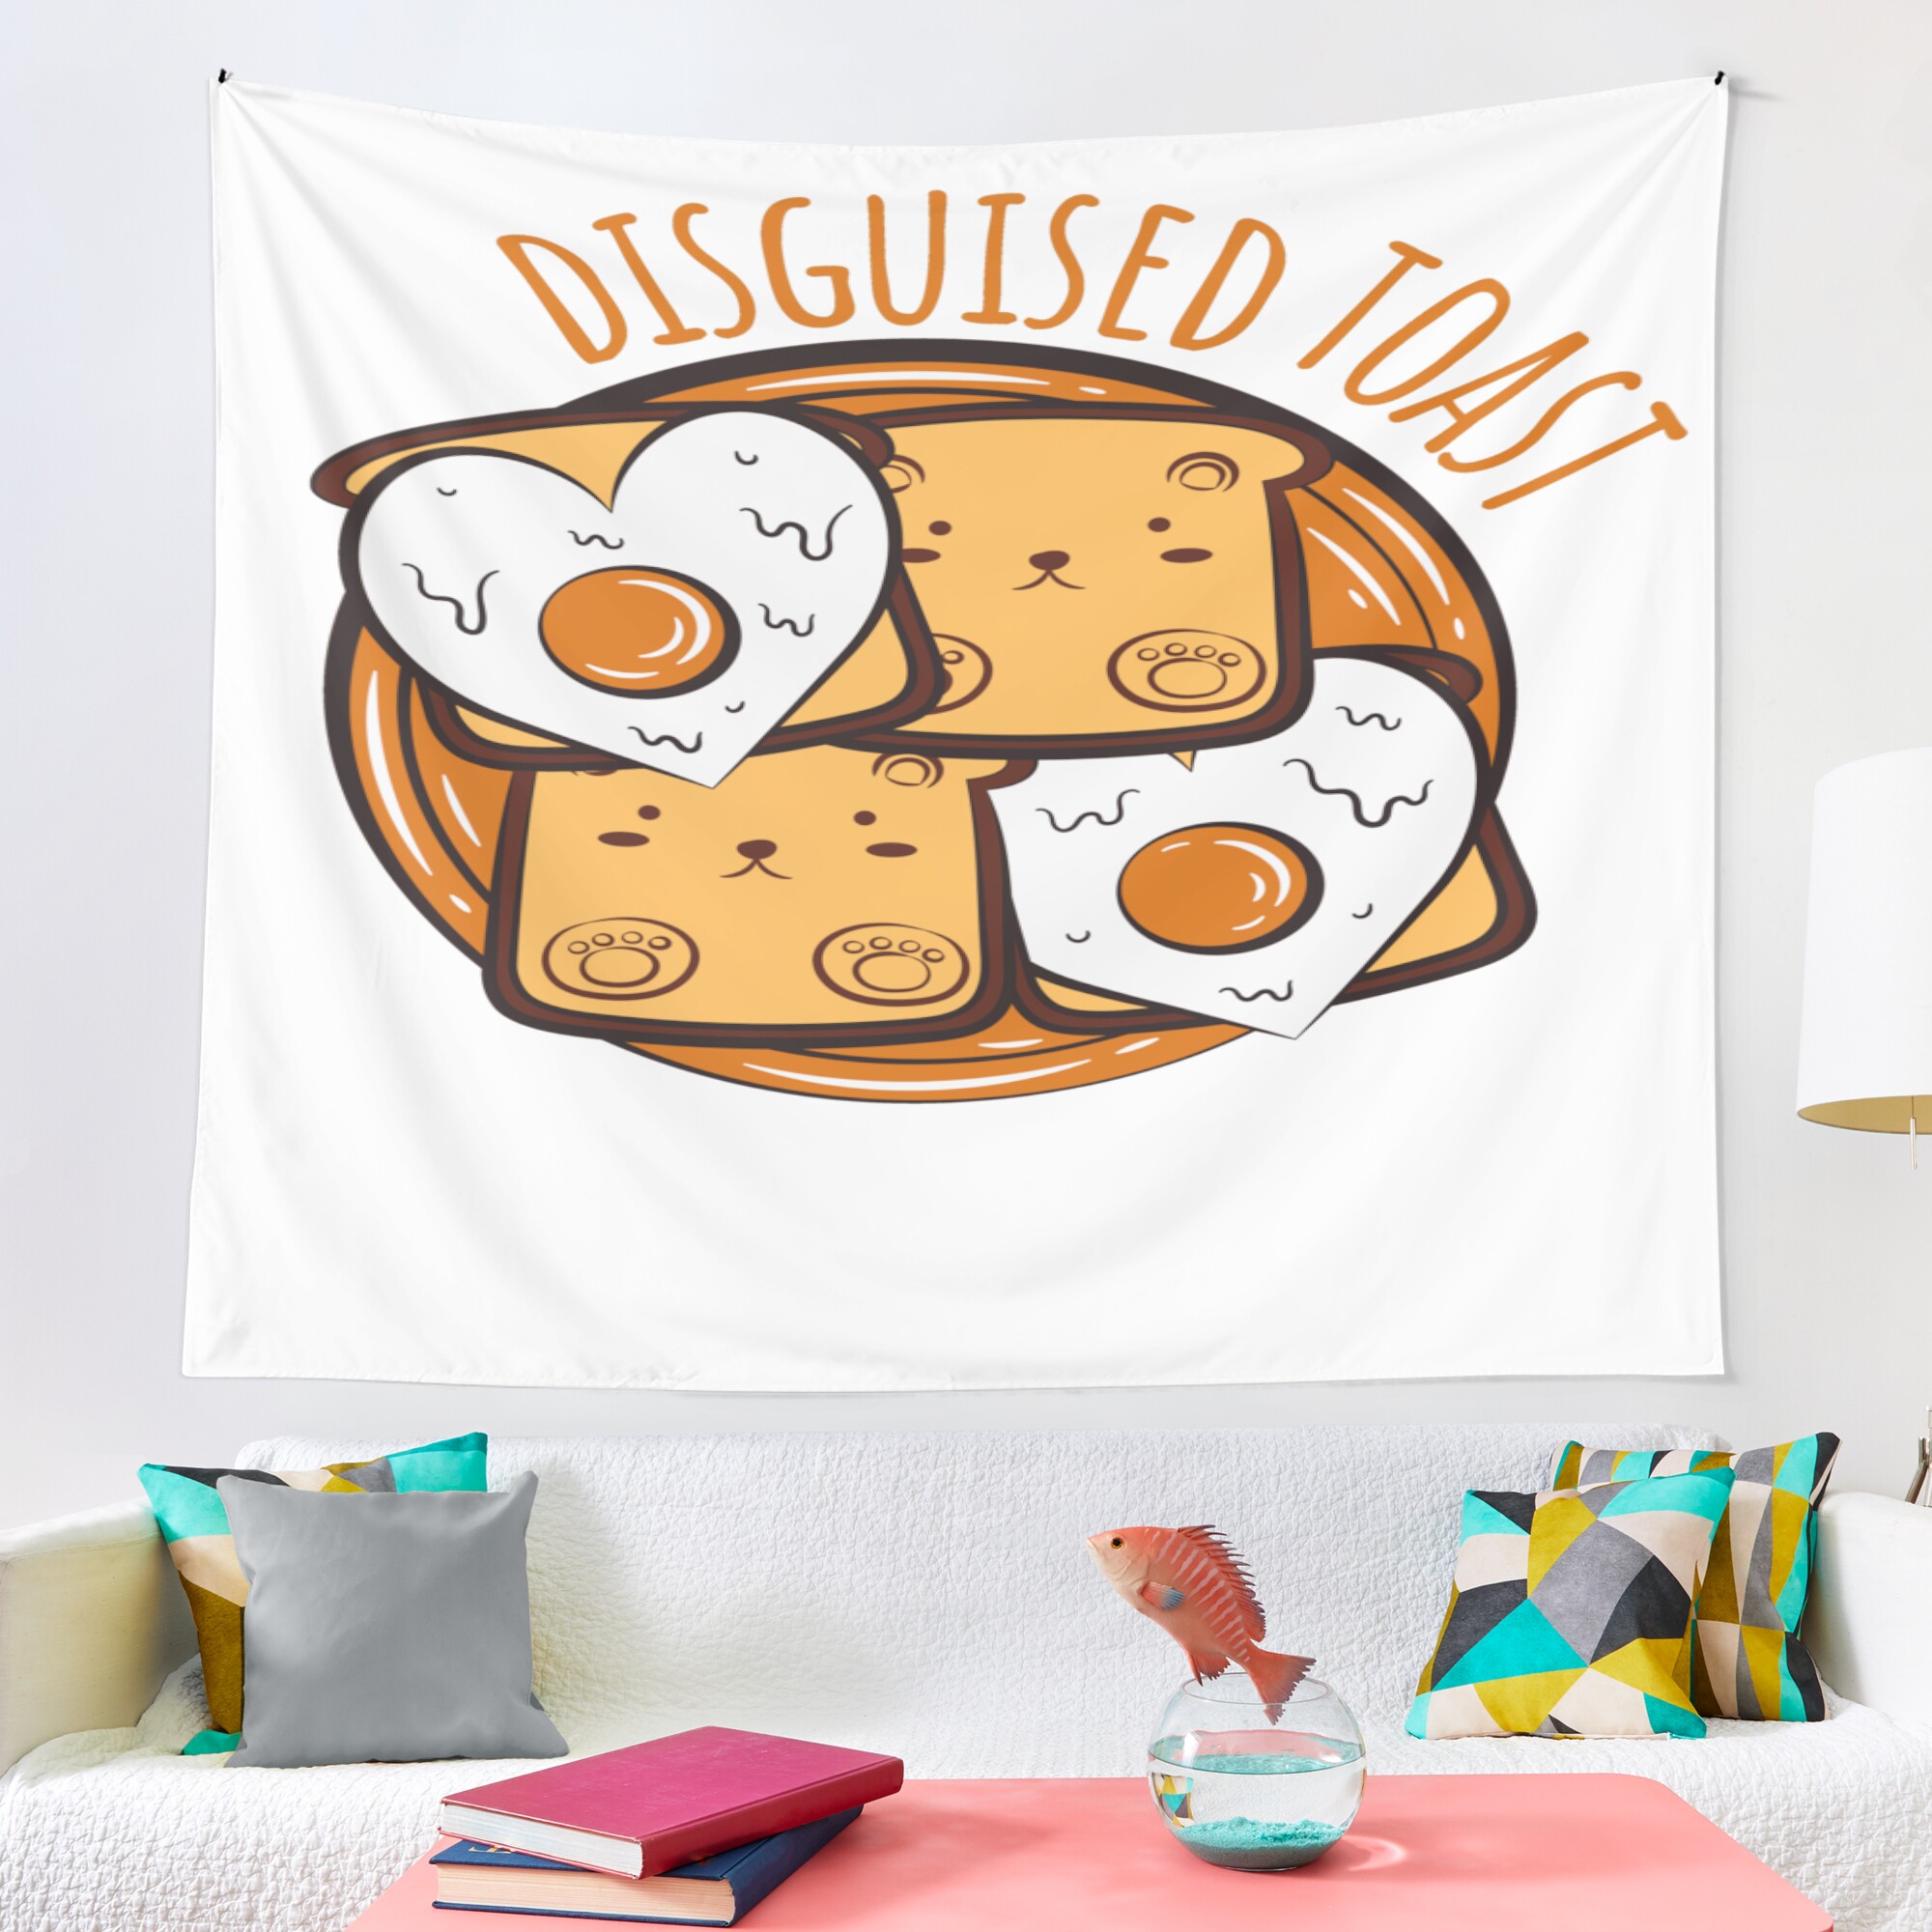 urtapestry lifestyle largesquare2000x2000 9 - Disguised Toast Shop